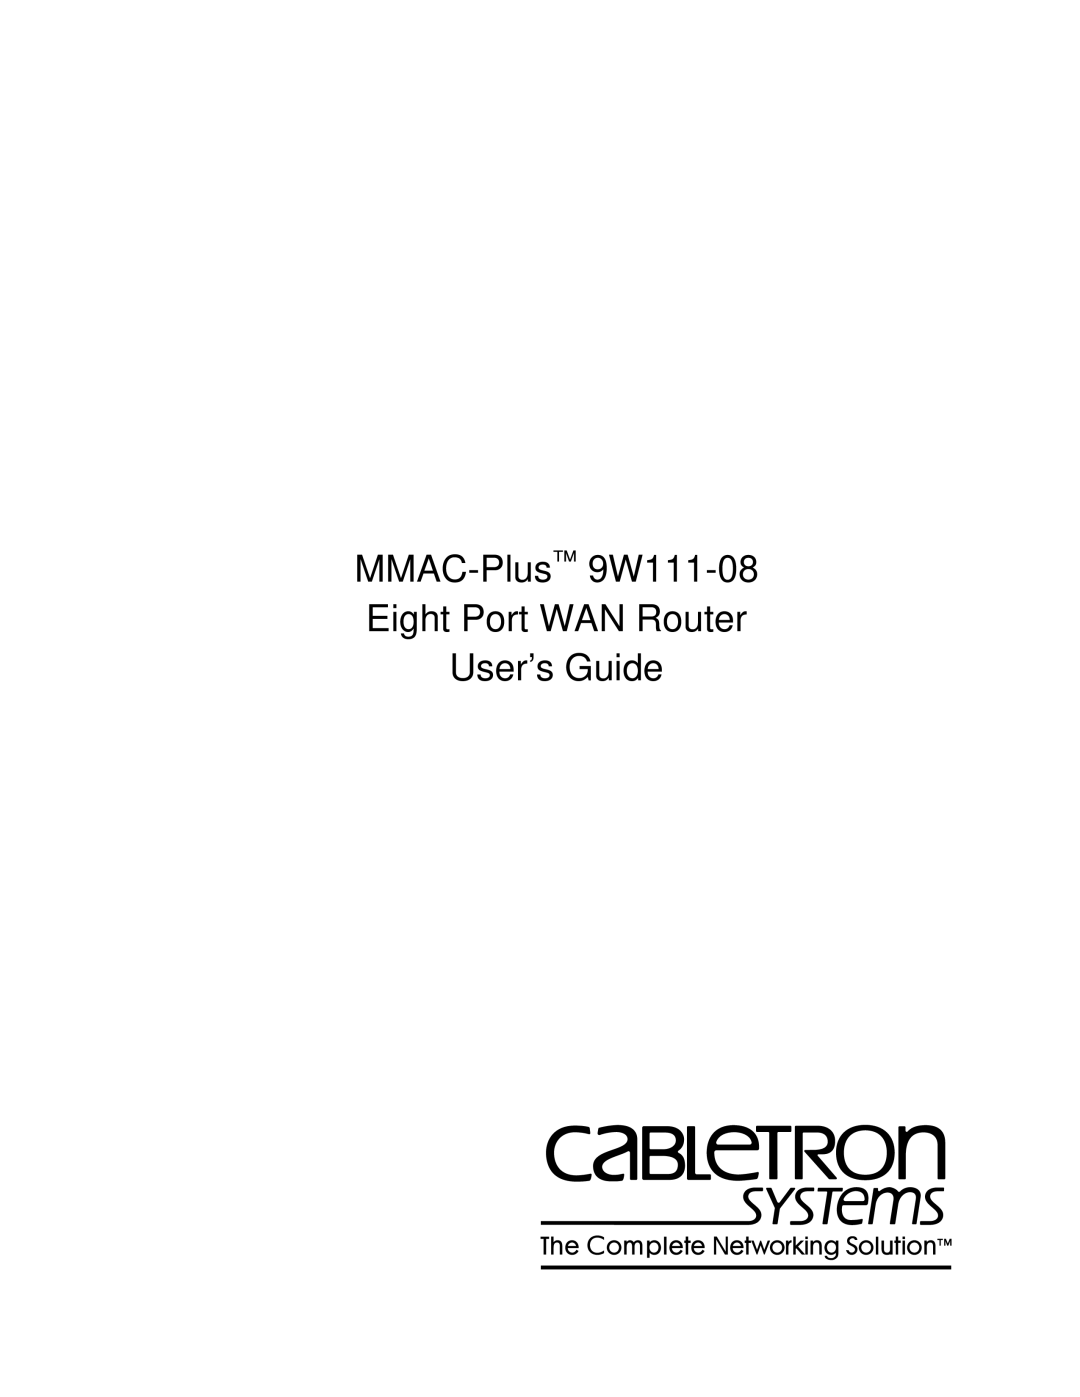 Cabletron Systems manual MMAC-Plus 9W111-08, Eight Port WAN Router User’s Guide 